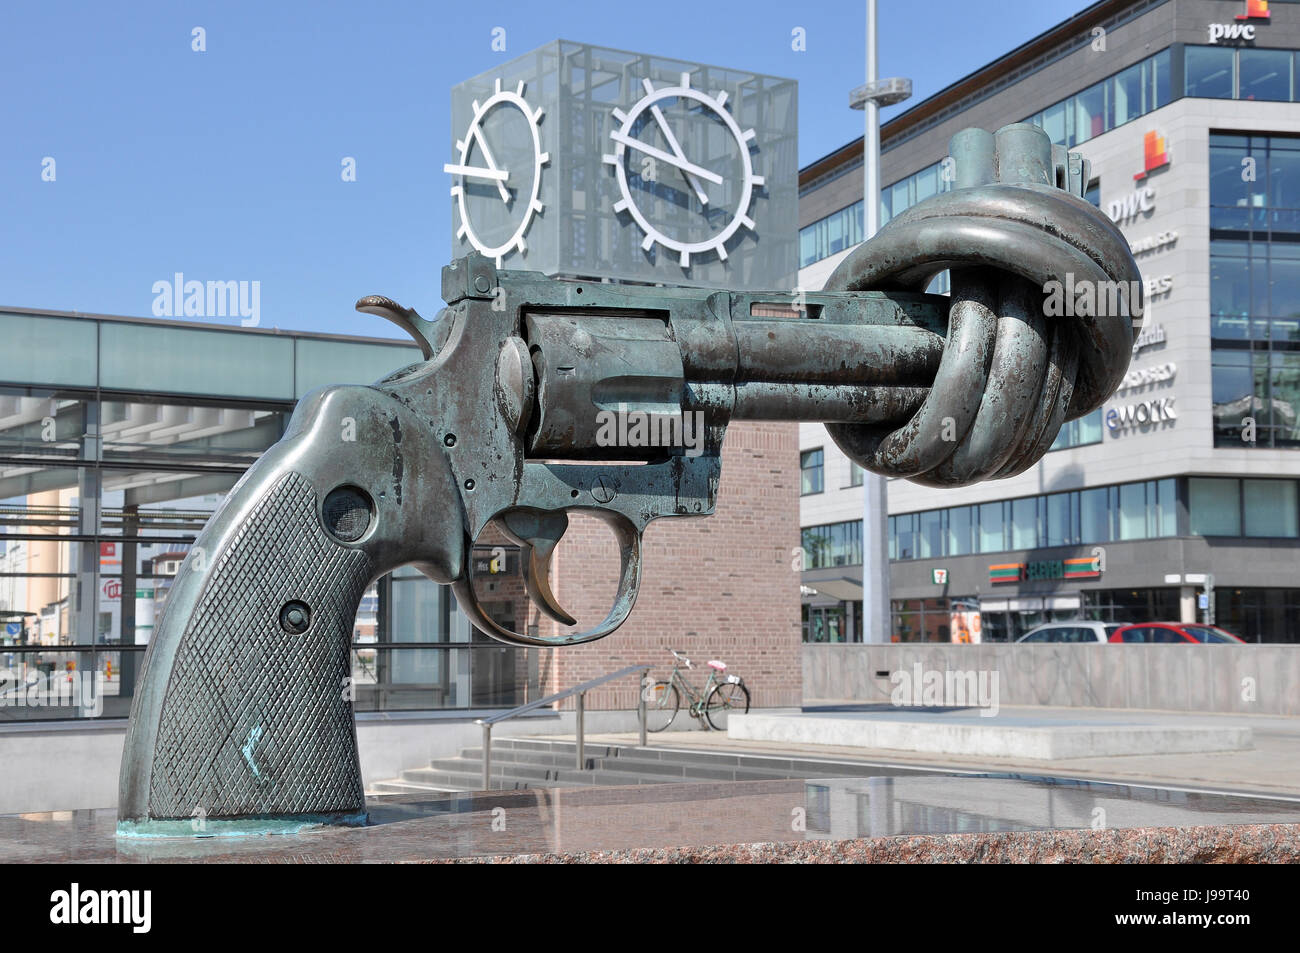 Non Violence, a sculpture by Carl Fredrik Reutersward on display in Malmo, Sweden. Knotted gun Stock Photo